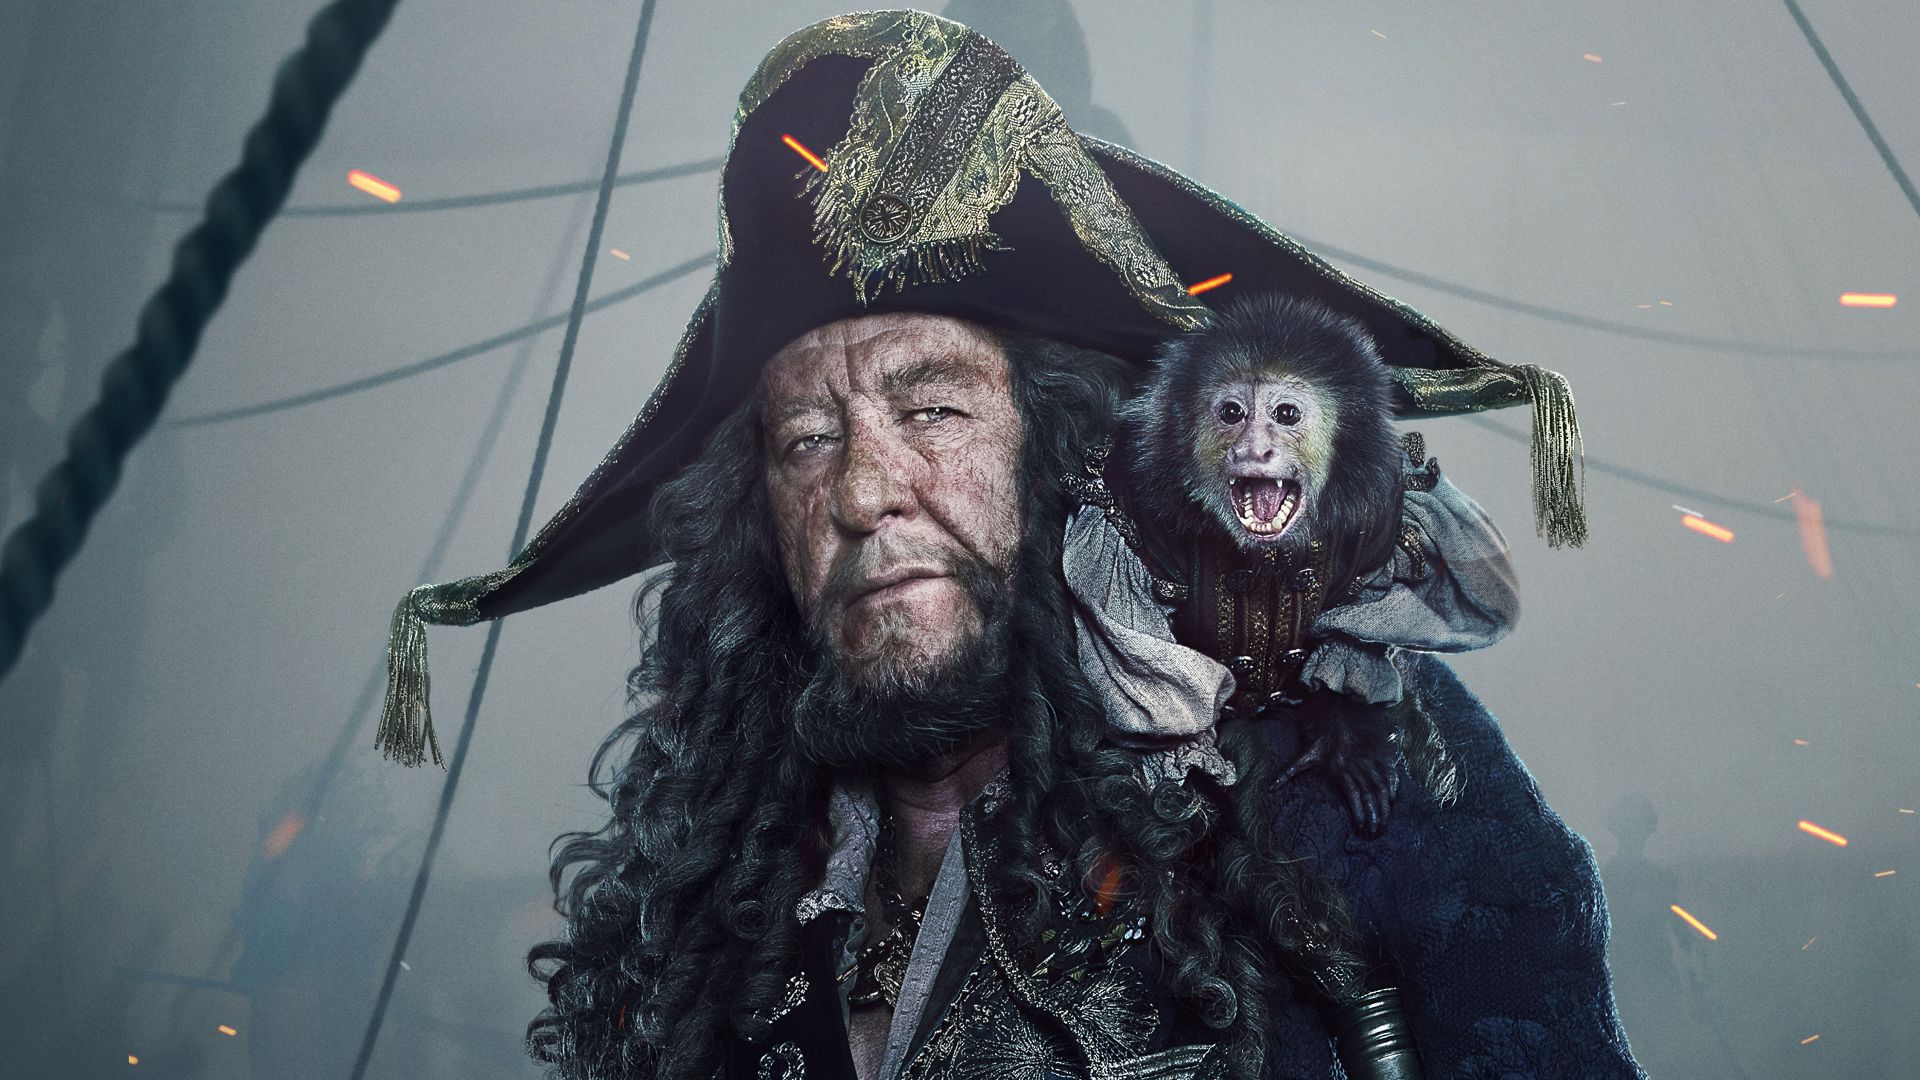 Wallpaper Geoffrey Rush as Captain Hector Barbossa in Pirates of the Caribbean: Dead Men Tell No Tales, movie